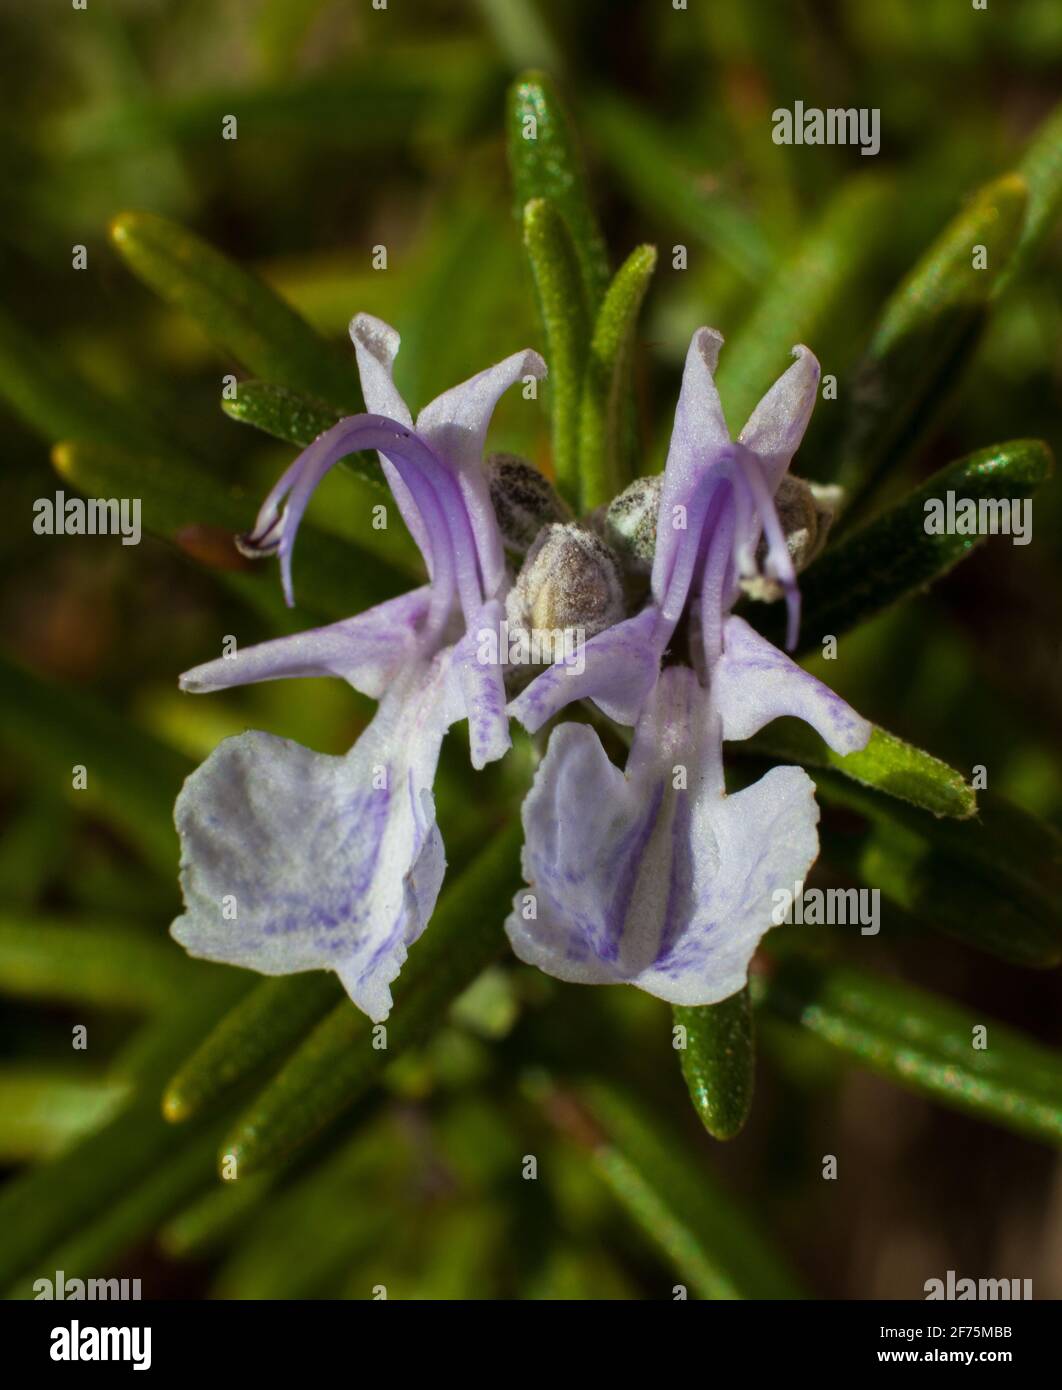 Close up view of two blue, purple and white rosemary flowers on a sunny day Stock Photo